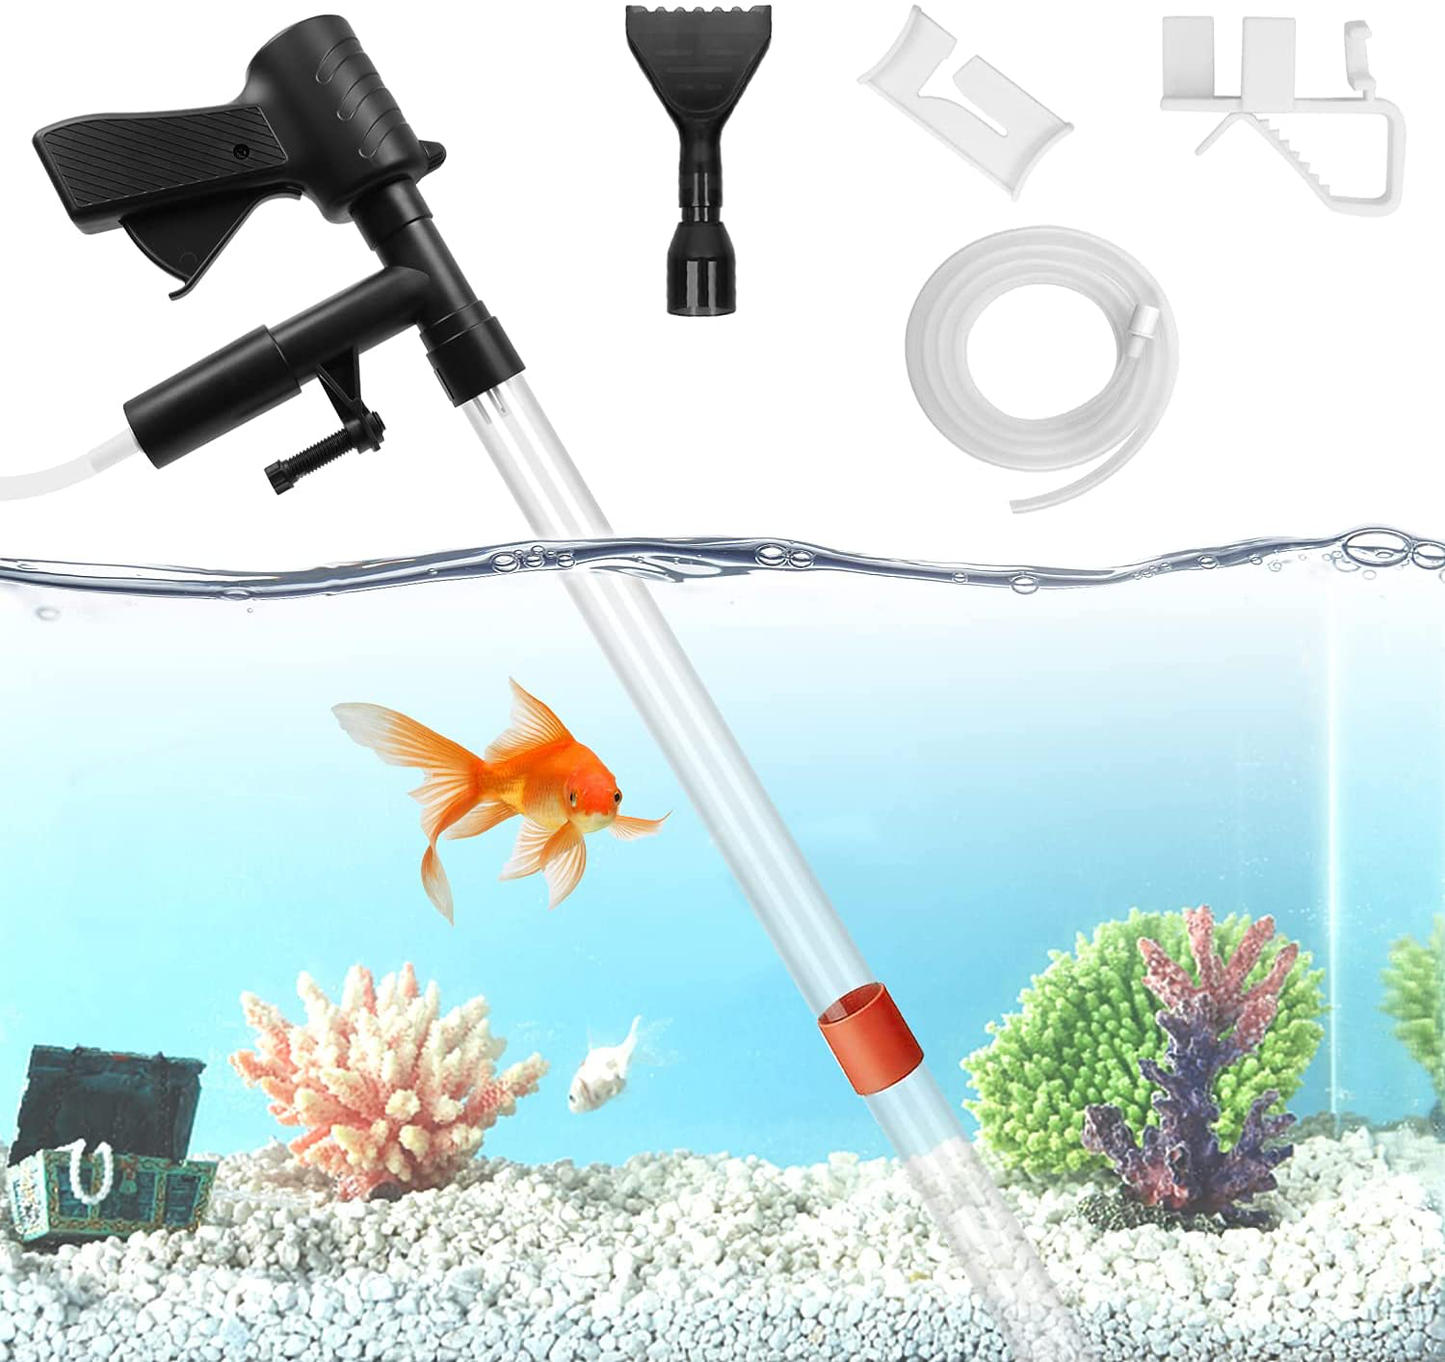 KAREEME Aquarium Gravel Cleaner, Quick and Long Nozzle Water Changer, Professional Fish Tank Sand Cleaner Kit with Air-Pressing Button and Adjustable Water Hose Controller - BPA Free